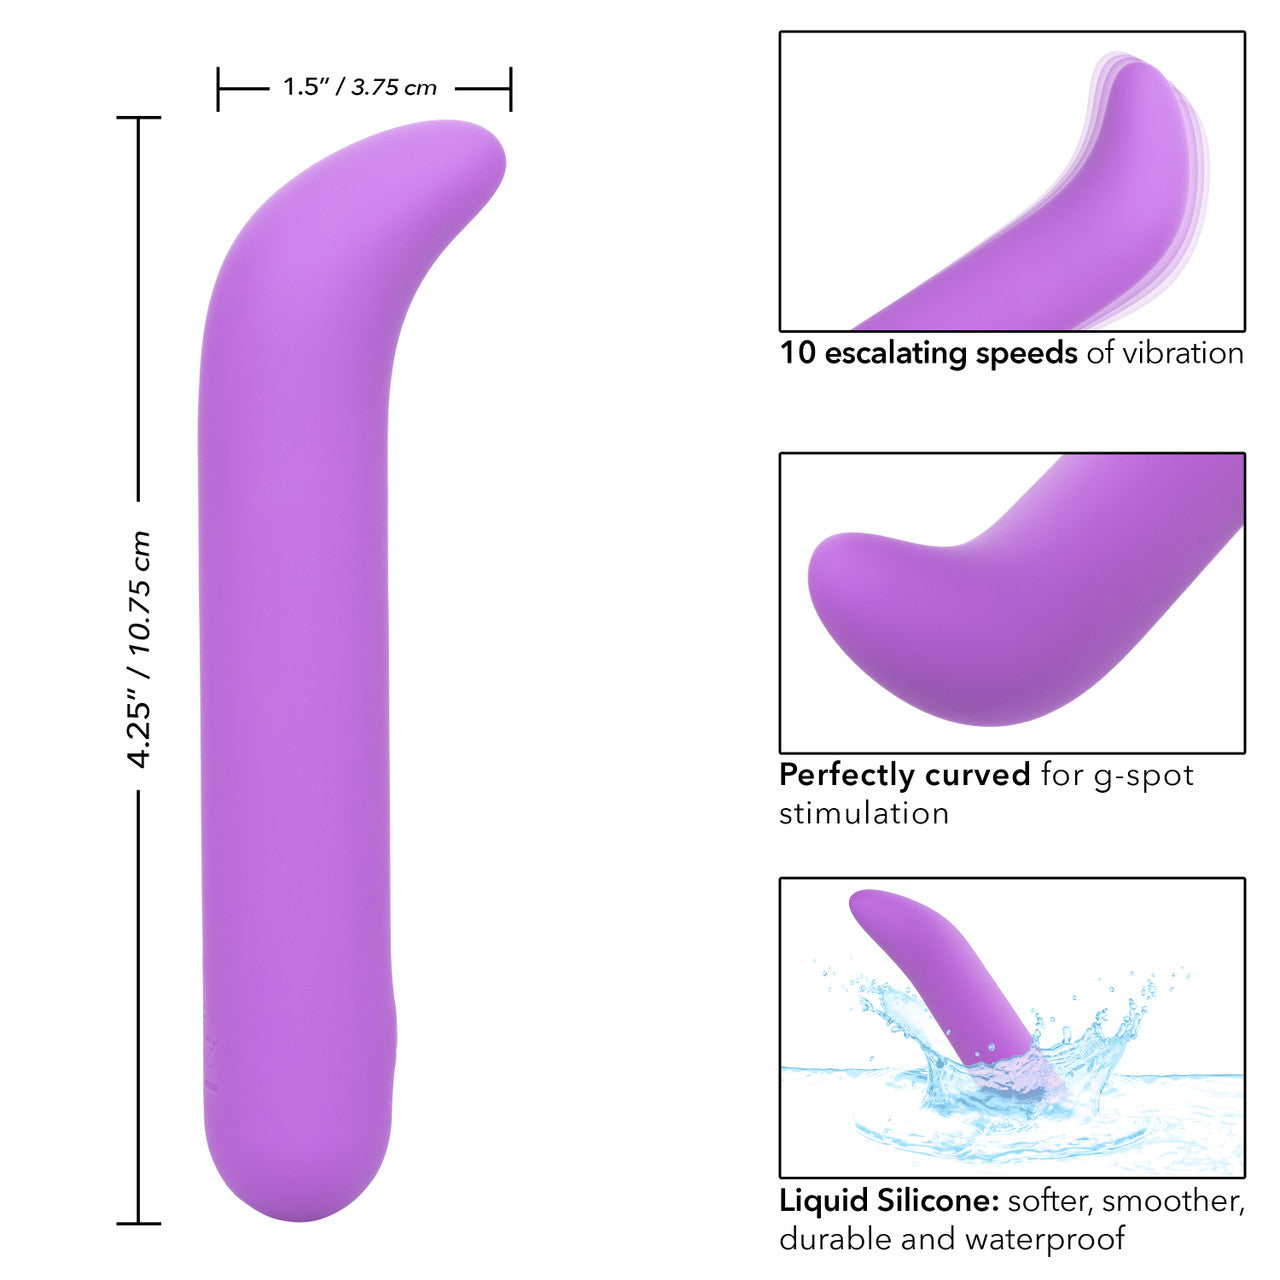 Diagram showing fuscia mini g-spot vibrator dimensions, vibrating and curved tip, and splashing in water.